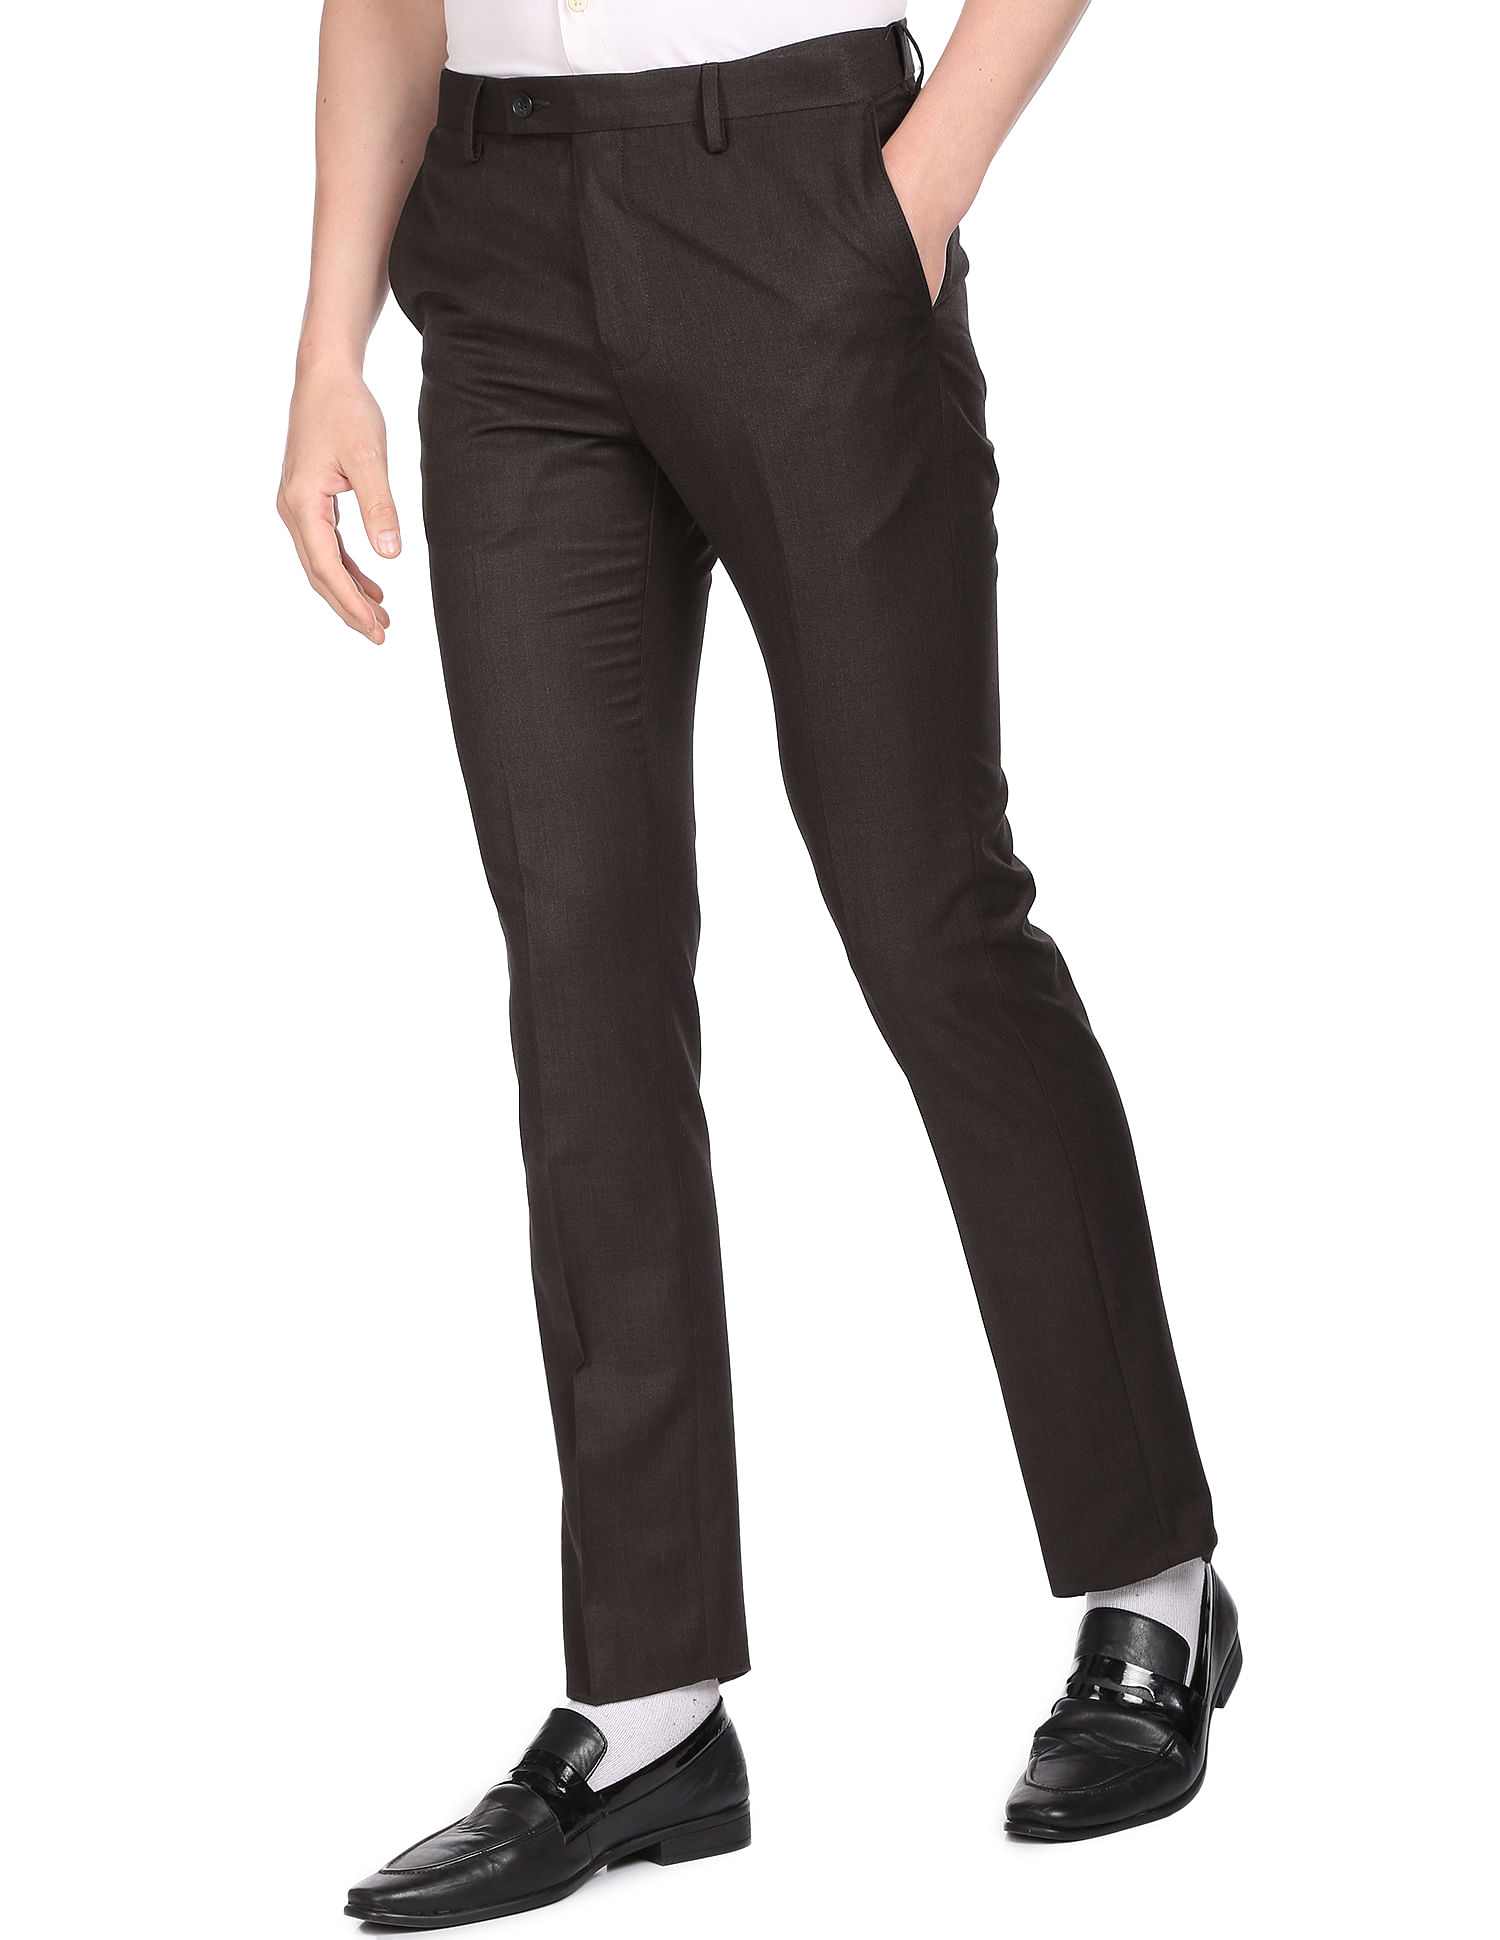 MENS DK BROWN SOLID TAPERED FIT TROUSER  JDC Store Online Shopping